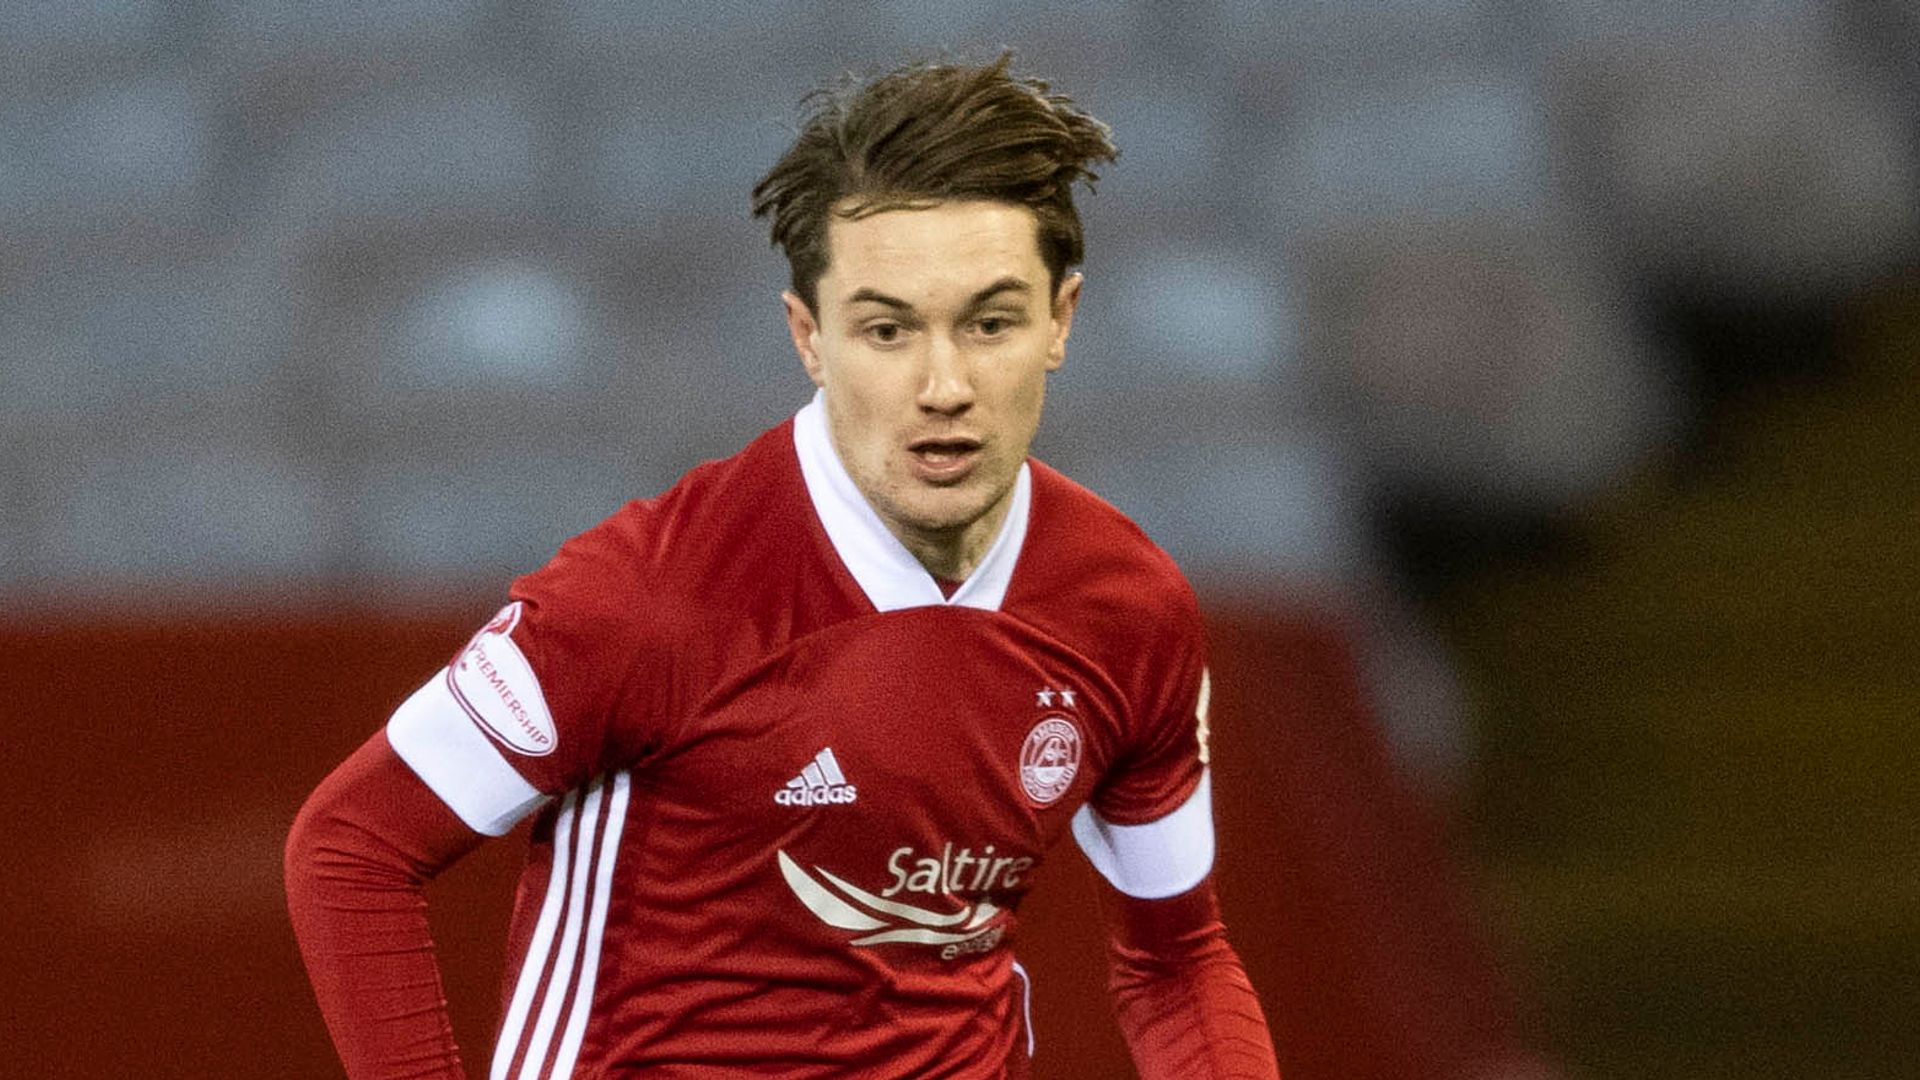 Rangers to make approach for Dons' Wright